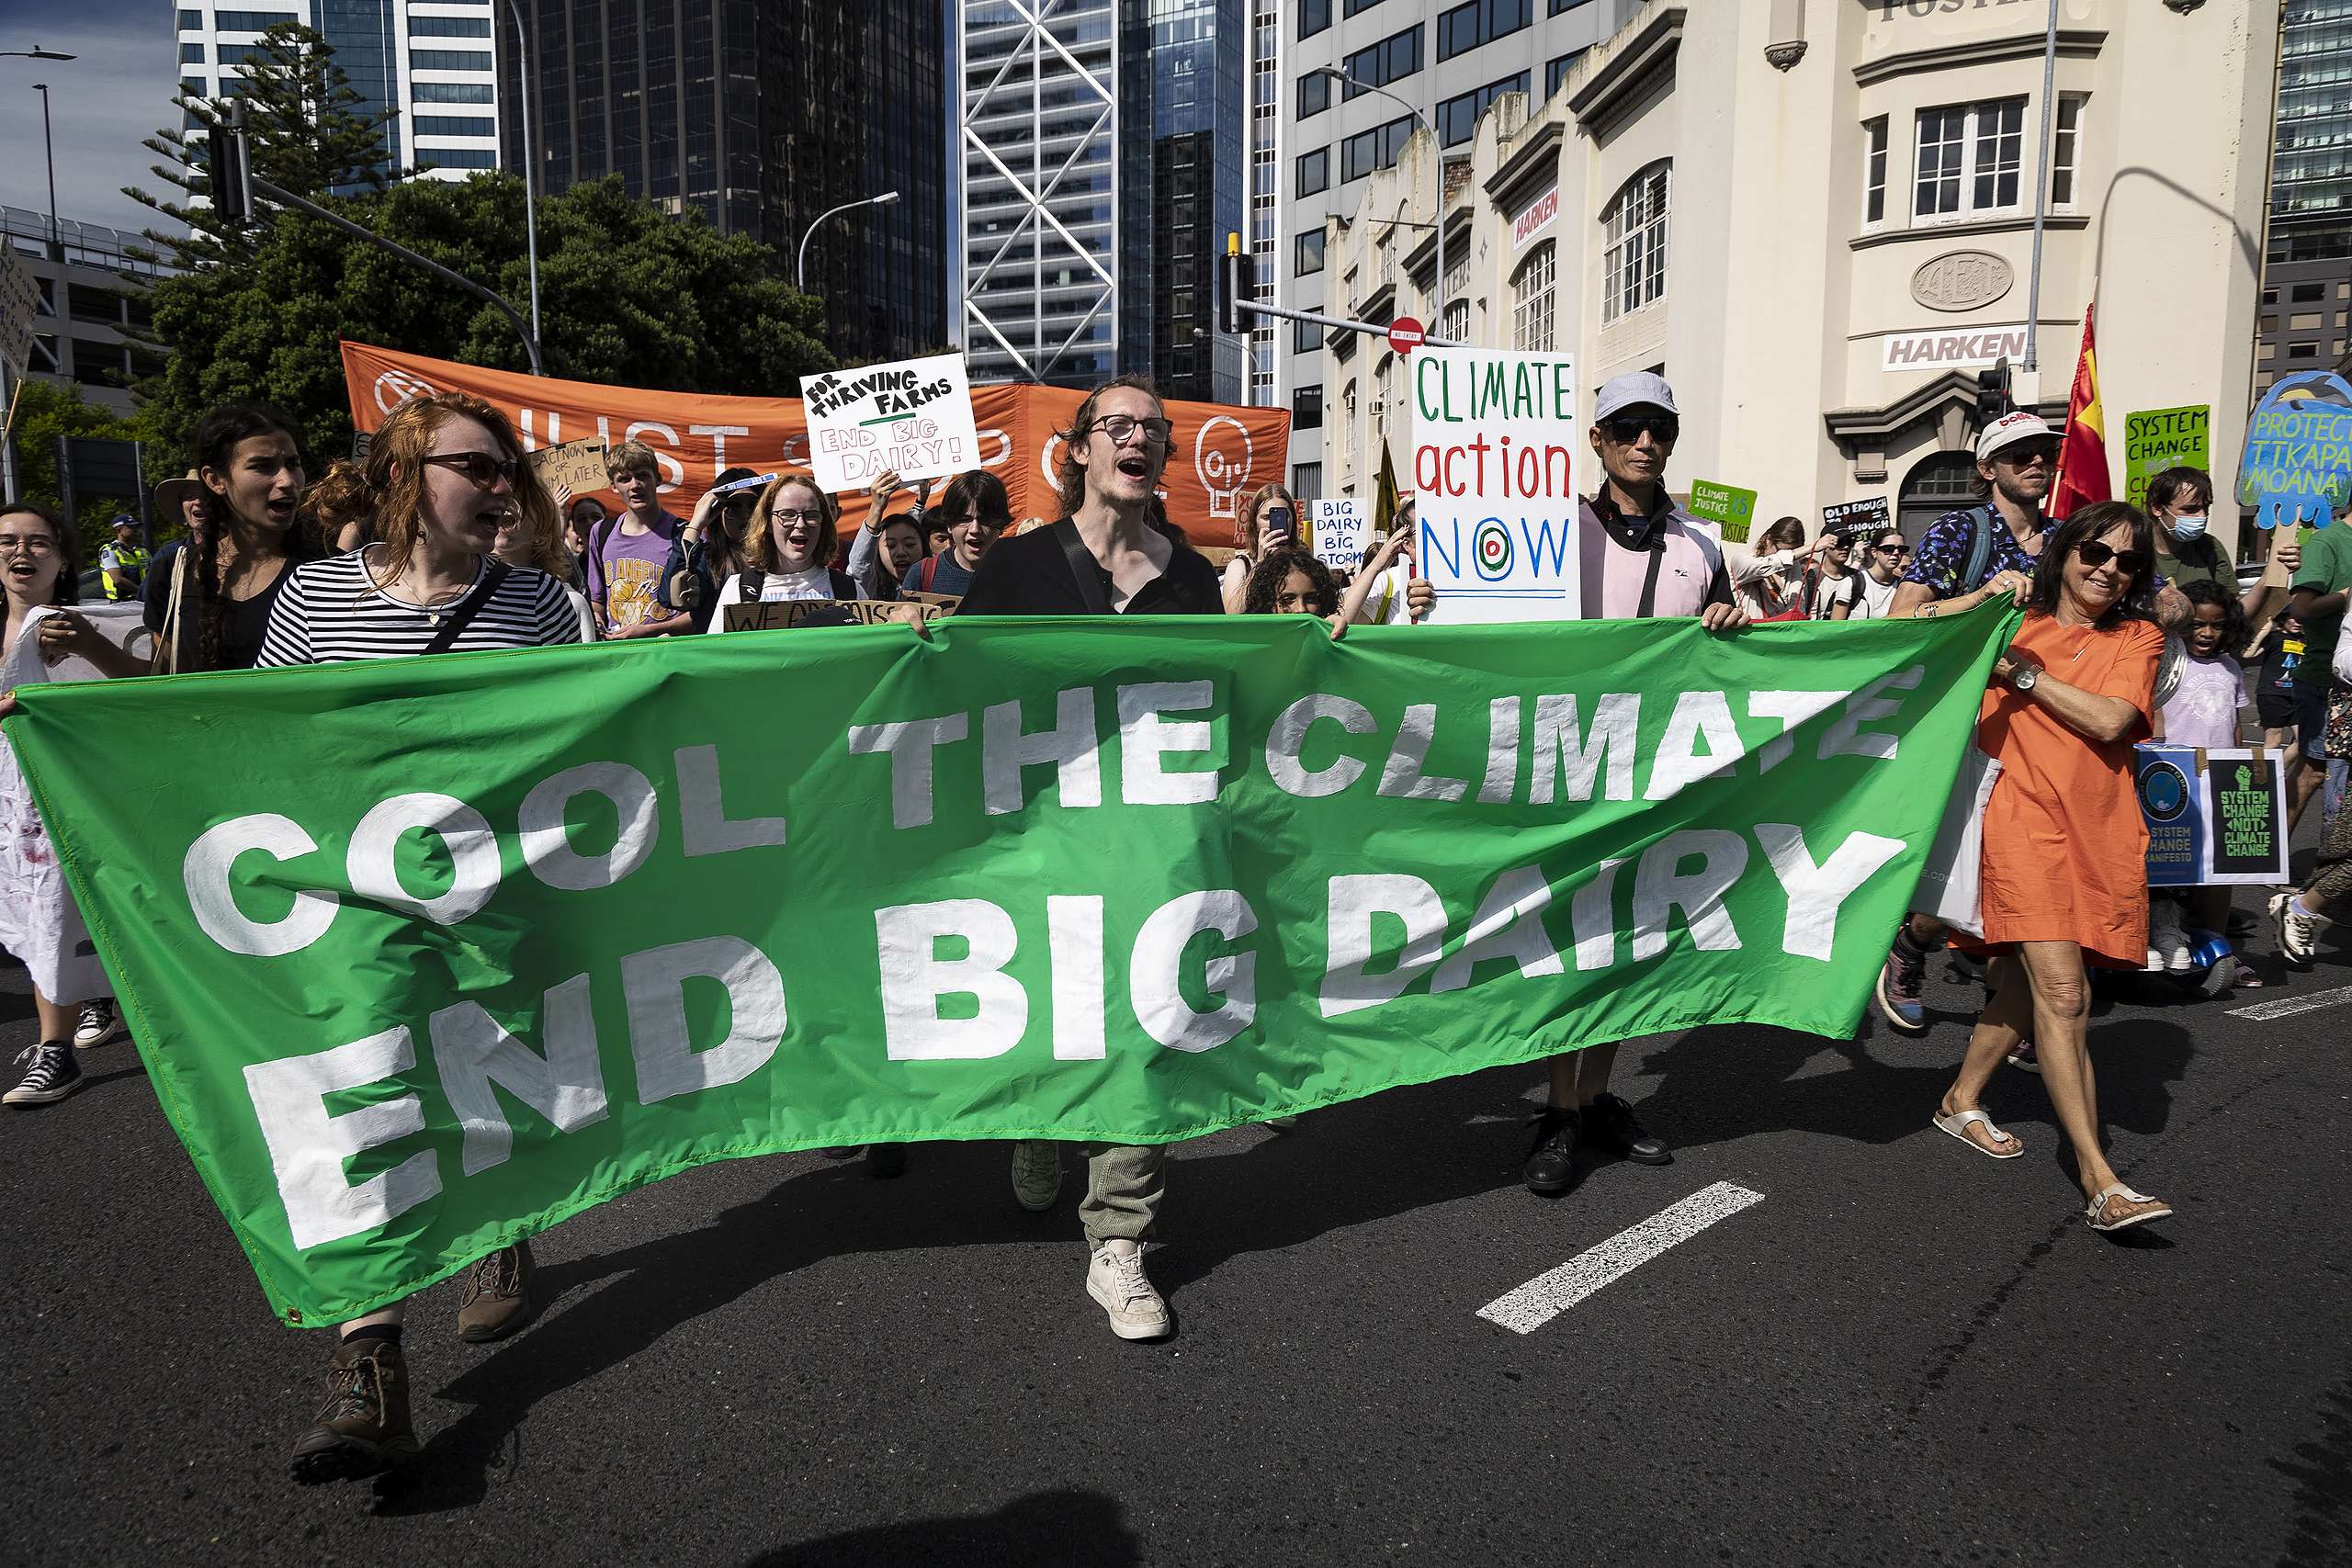 People walk behind a green banner that says Cool the climate, End big dairy